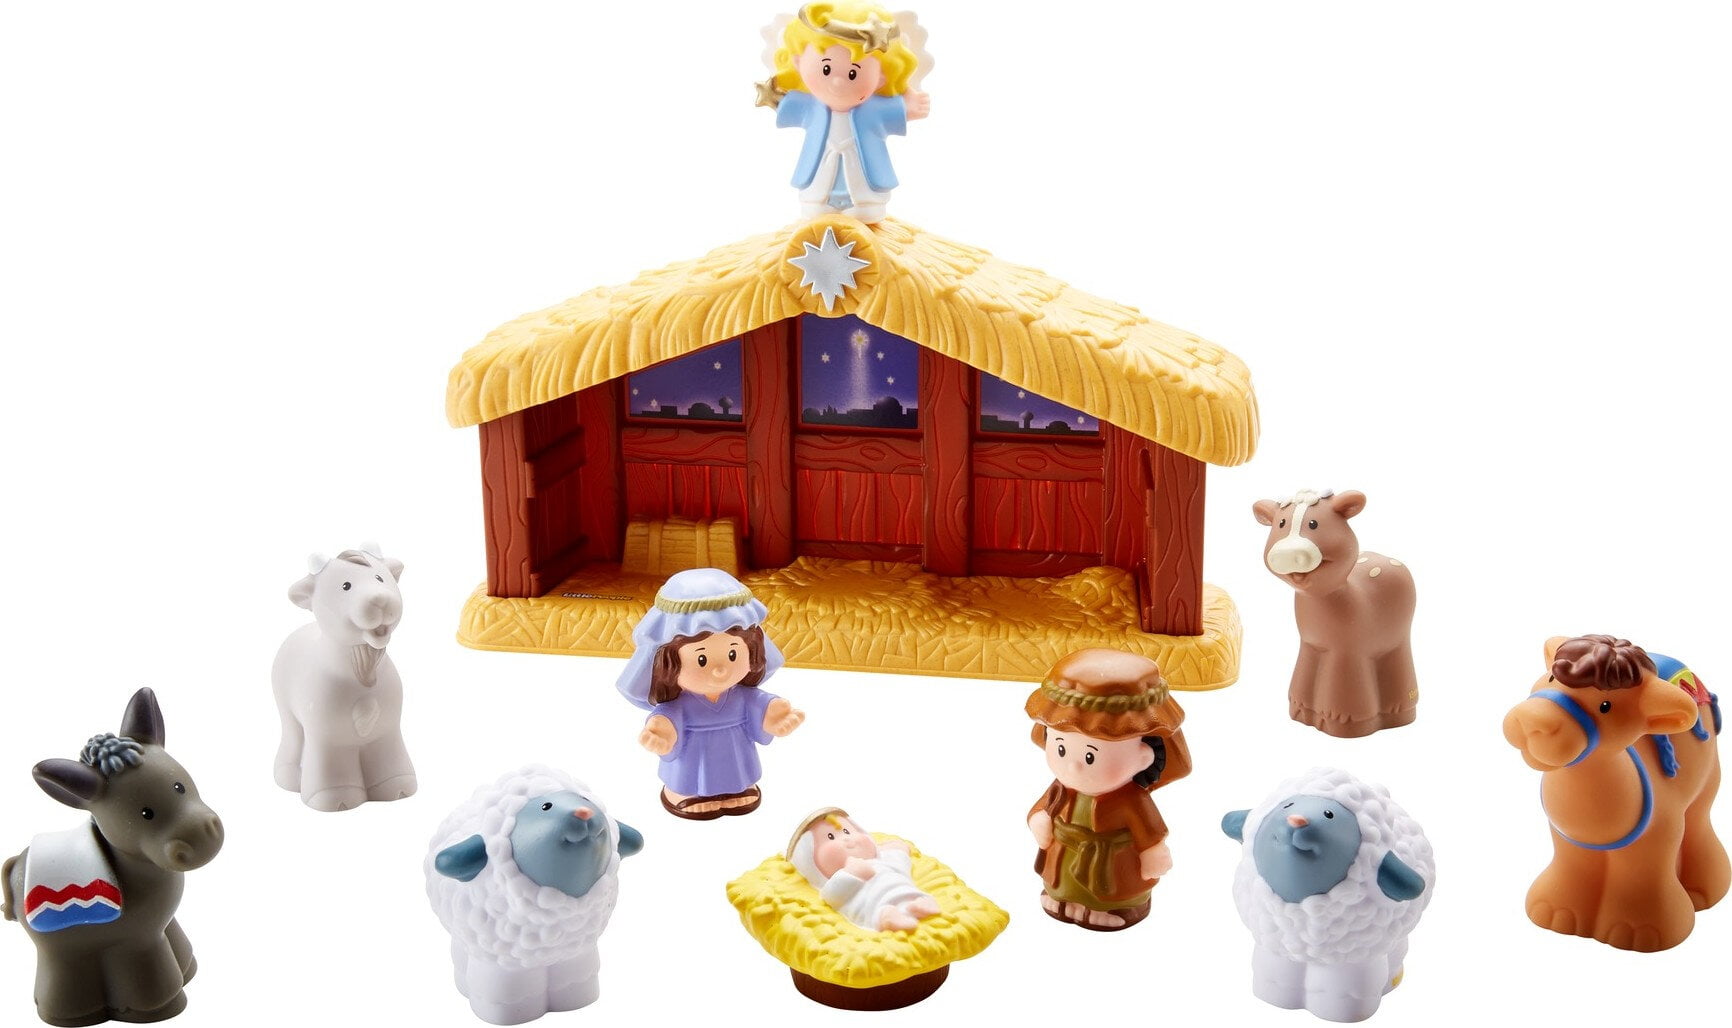 Details about   Fisher Price Little People Nativity BLUE WISEMEN KING African Christmas wise man 